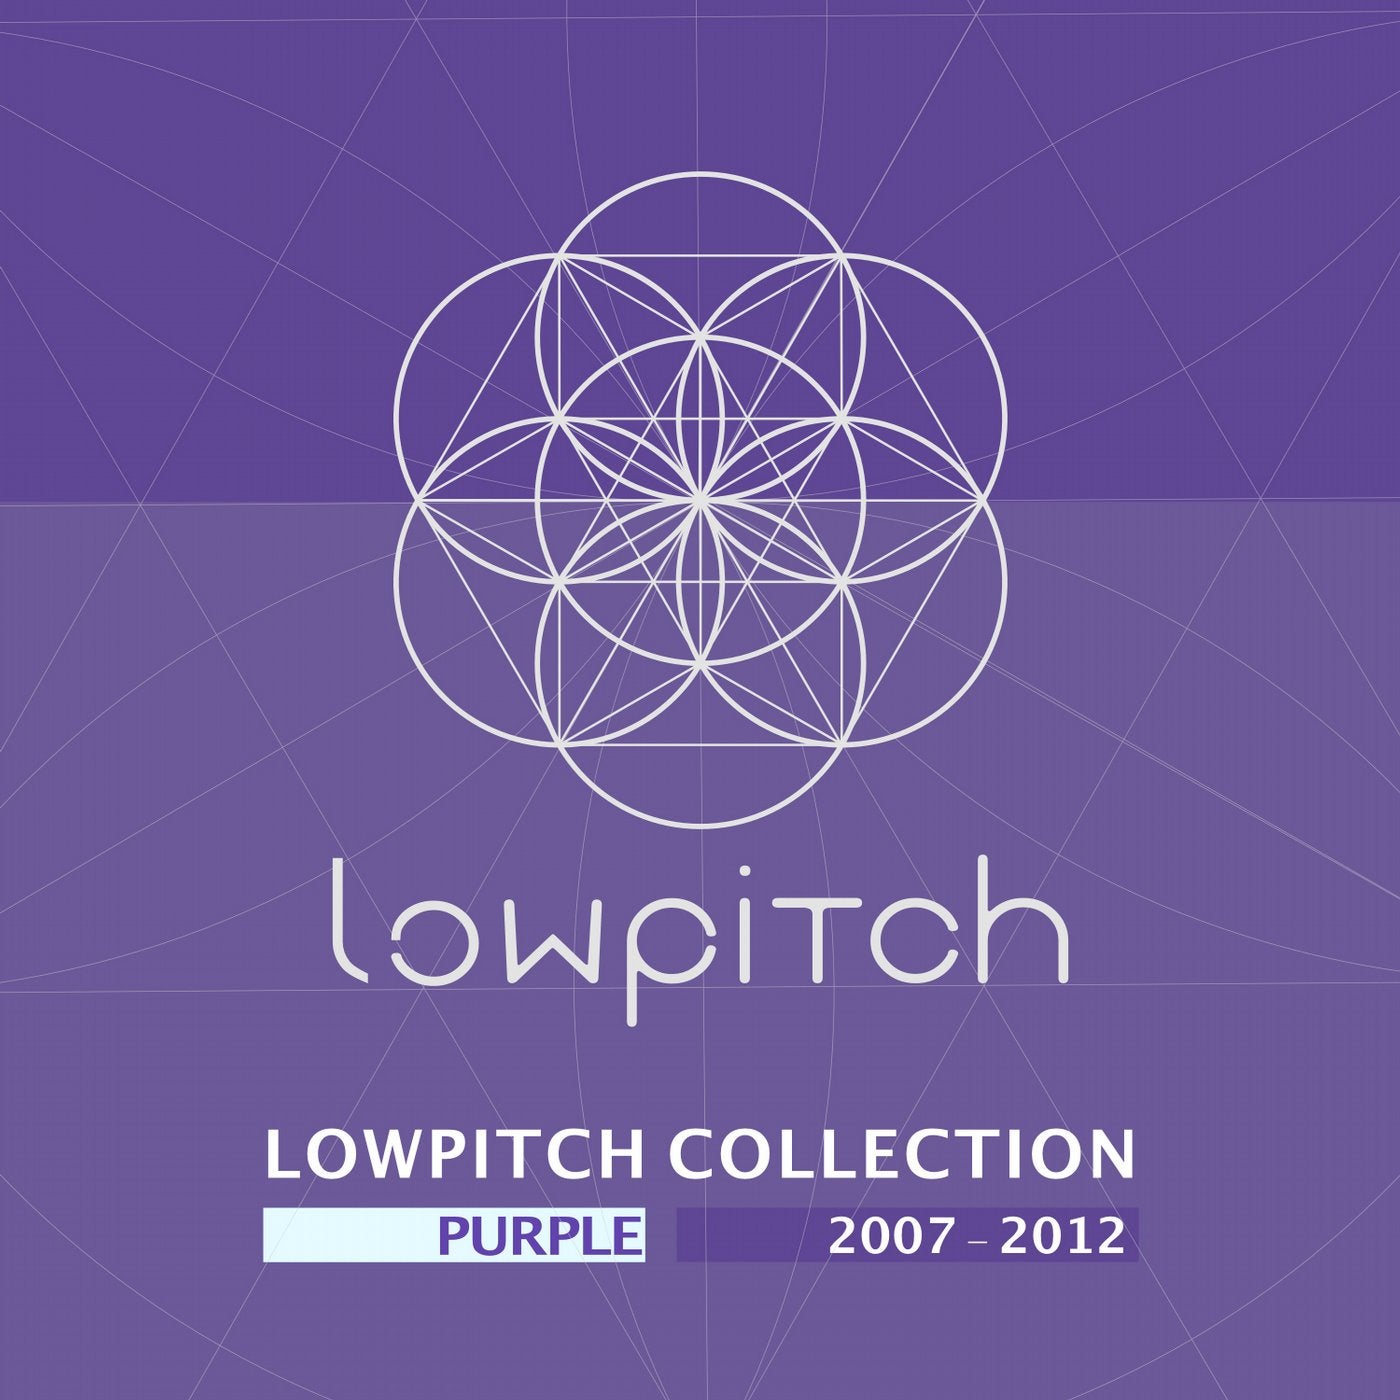 Lowpitch Collection: Purple (2007-2012)